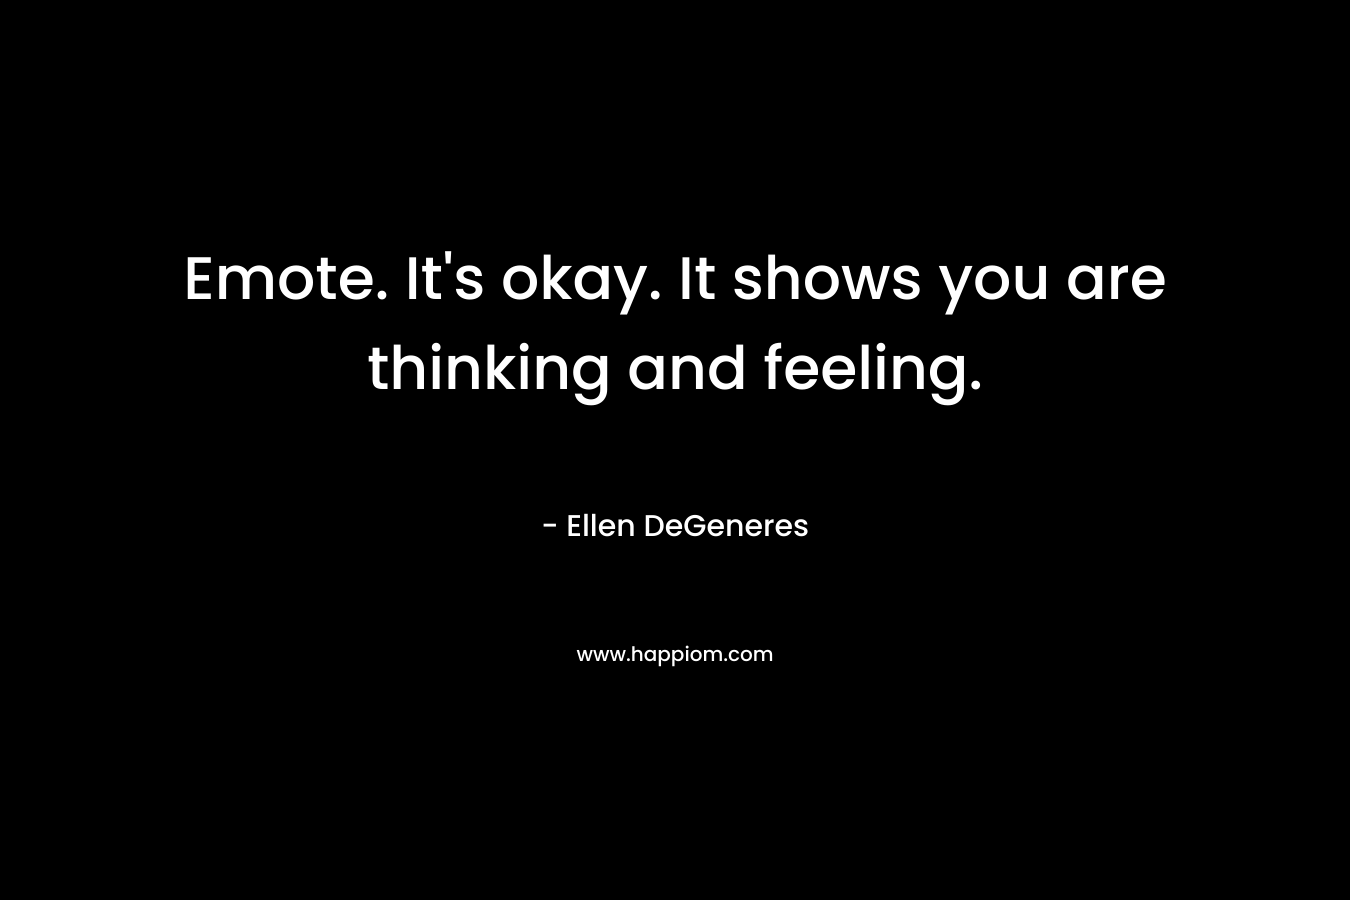 Emote. It's okay. It shows you are thinking and feeling.